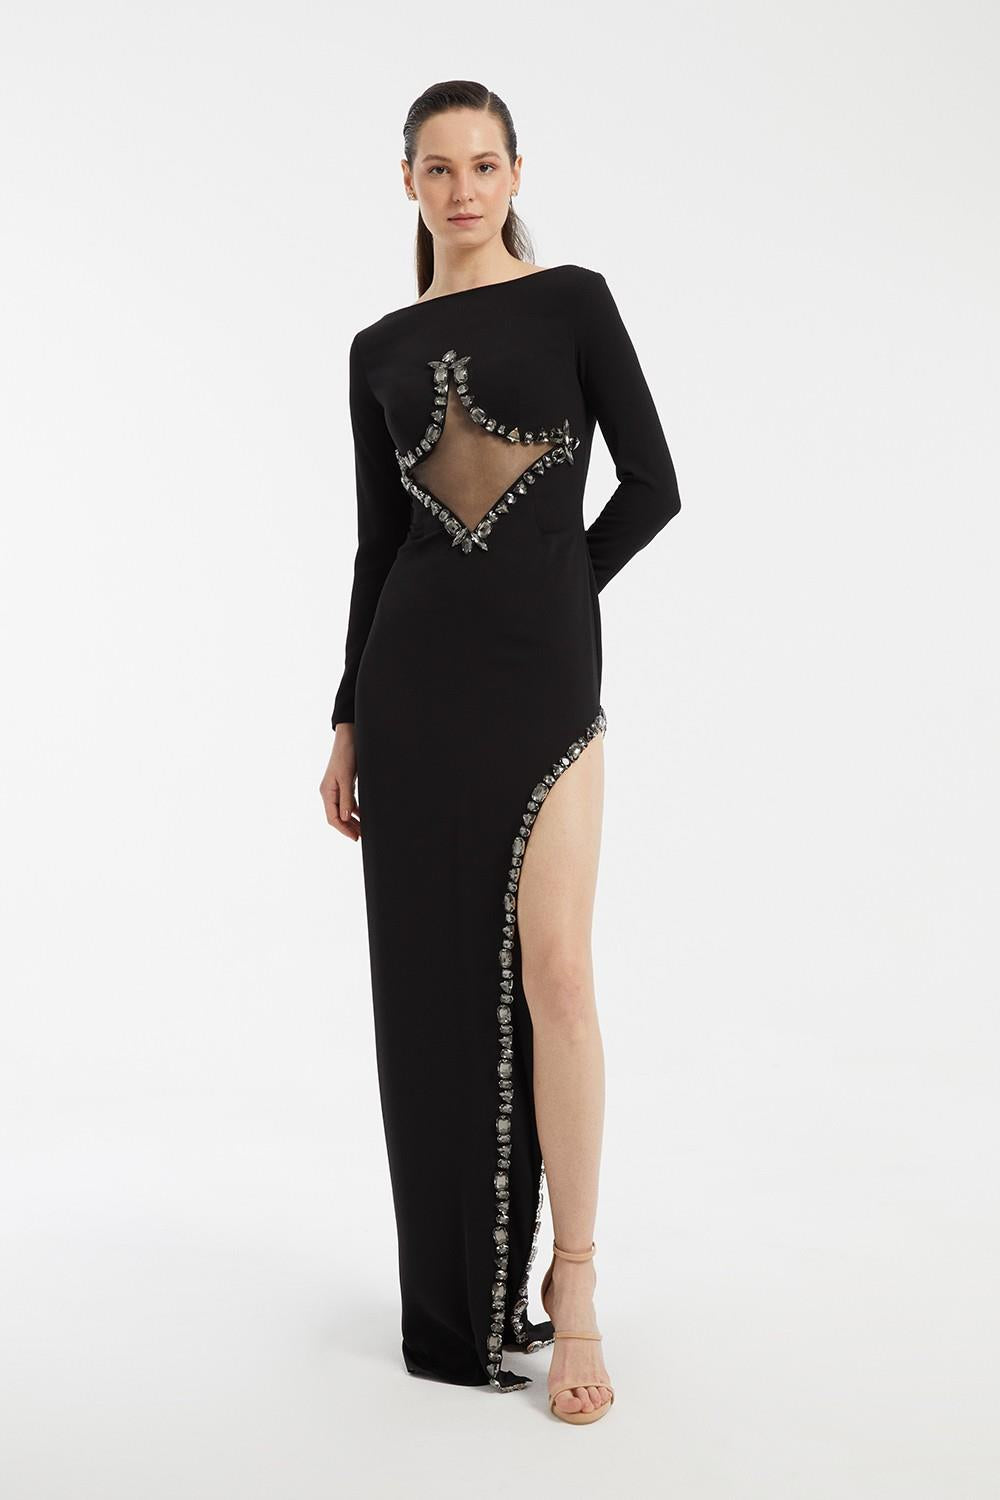 Bust Embroidery Detailed Long Sleeve Slit Long Evening Dress